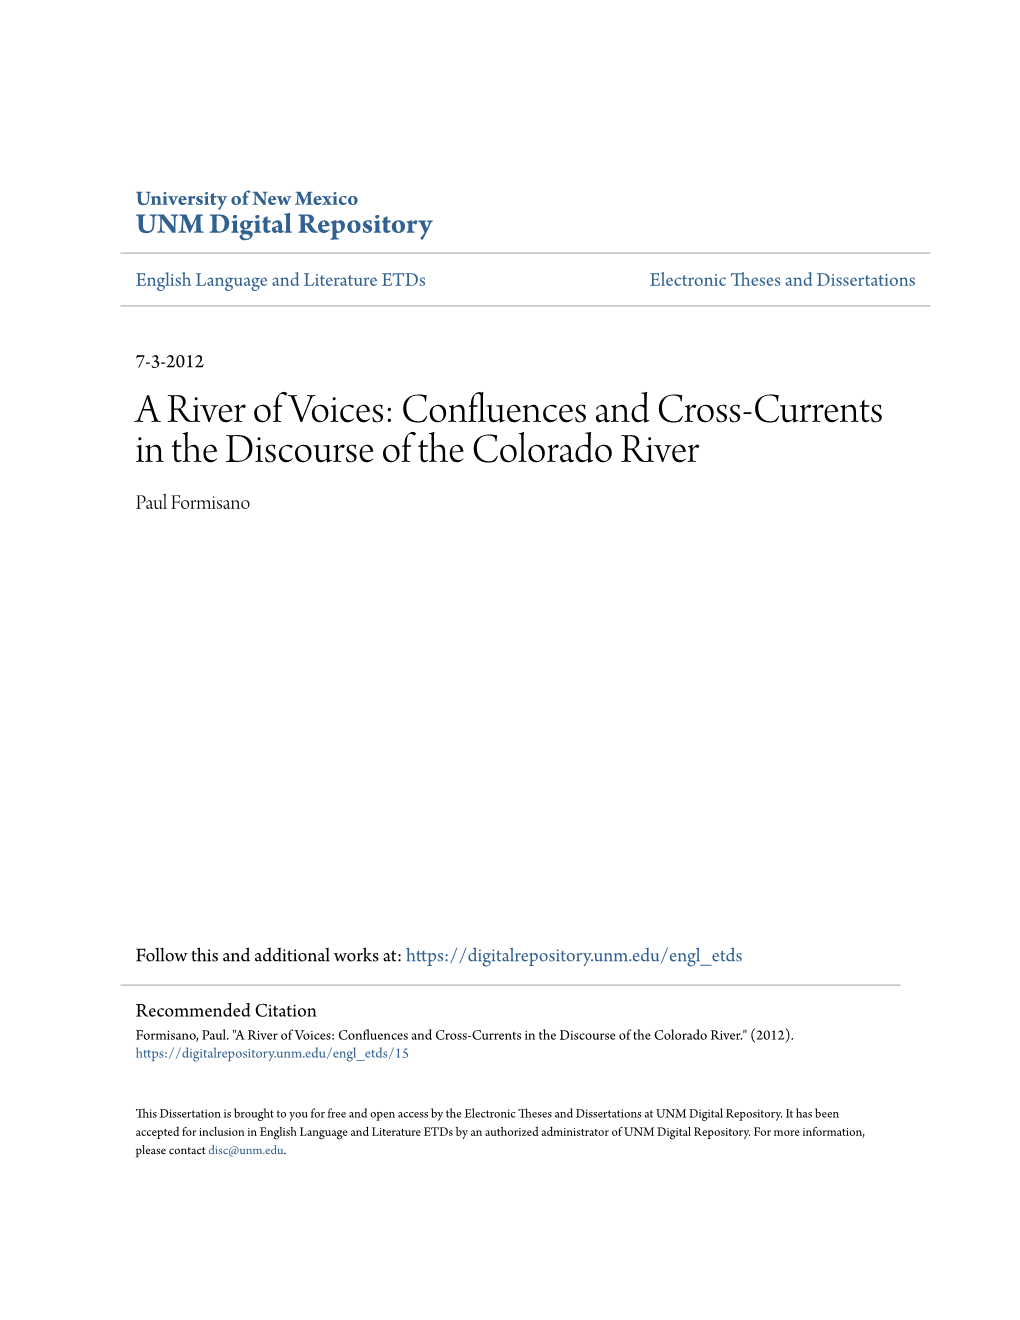 Confluences and Cross-Currents in the Discourse of the Colorado River Paul Formisano